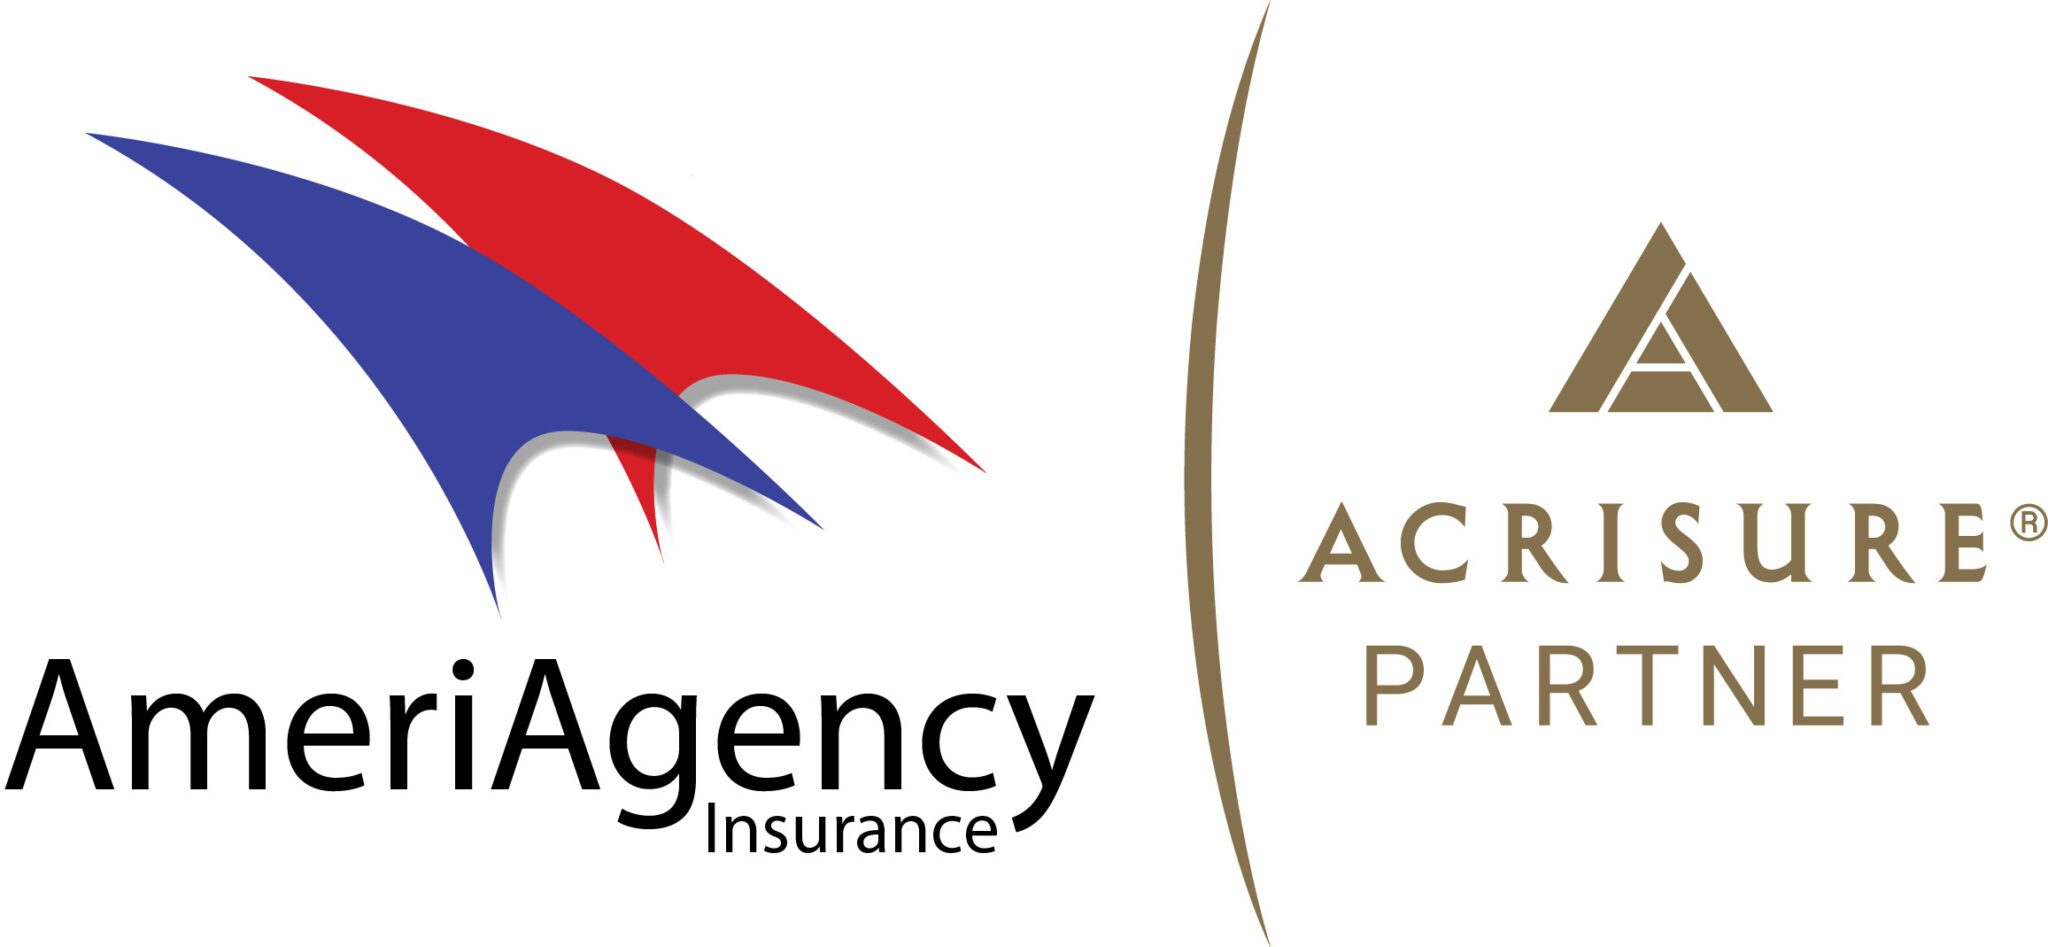 AmeriAgency: Proud To Be An Acrisure Partner